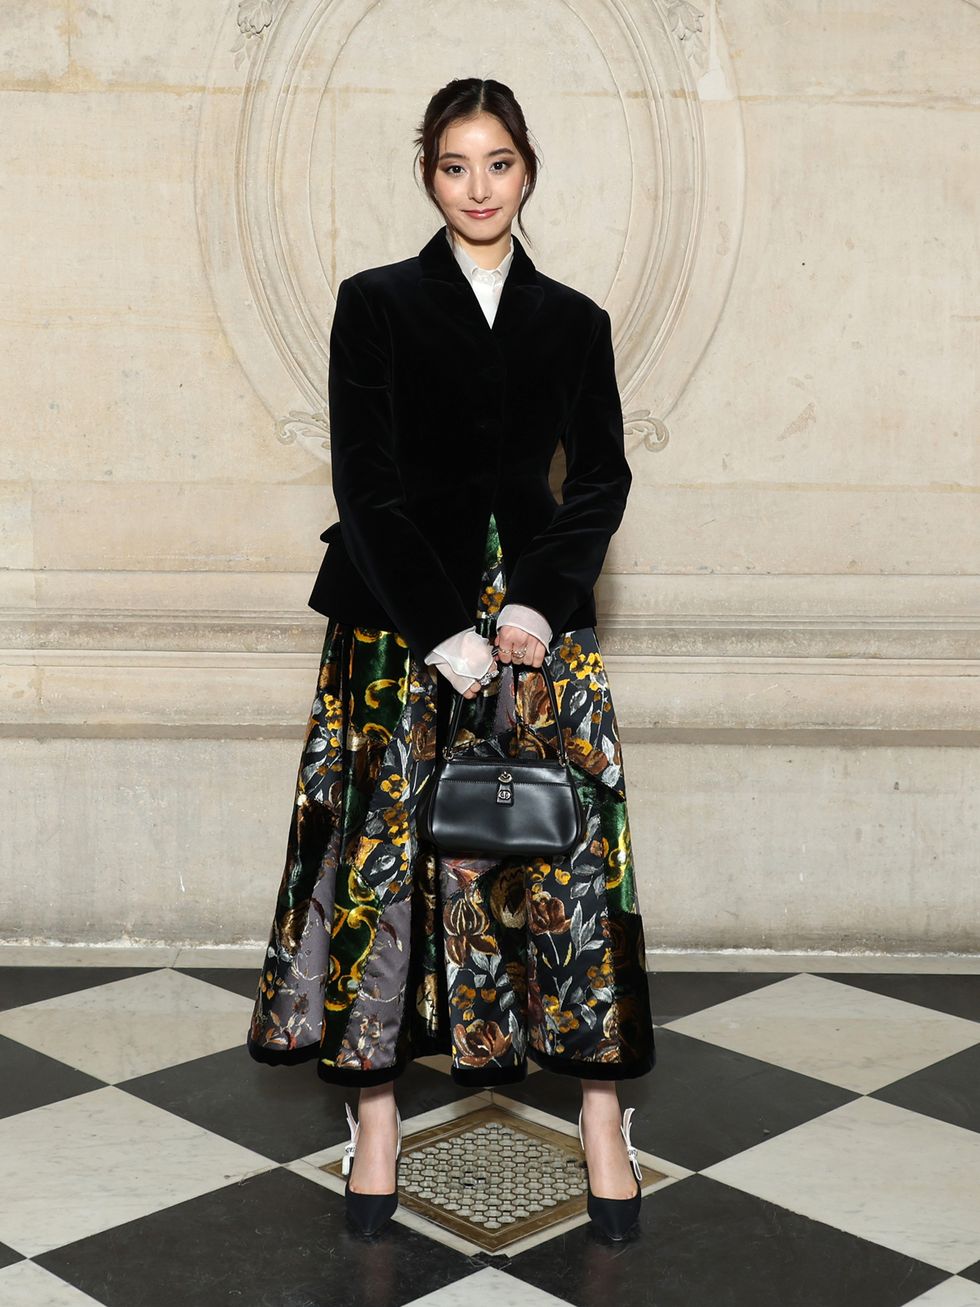 paris, france january 23 yuko araki attends the christian dior haute couture spring summer 2023 show as part of paris fashion week on january 23, 2023 in paris, france photo by pascal le segretaingetty images for christian dior